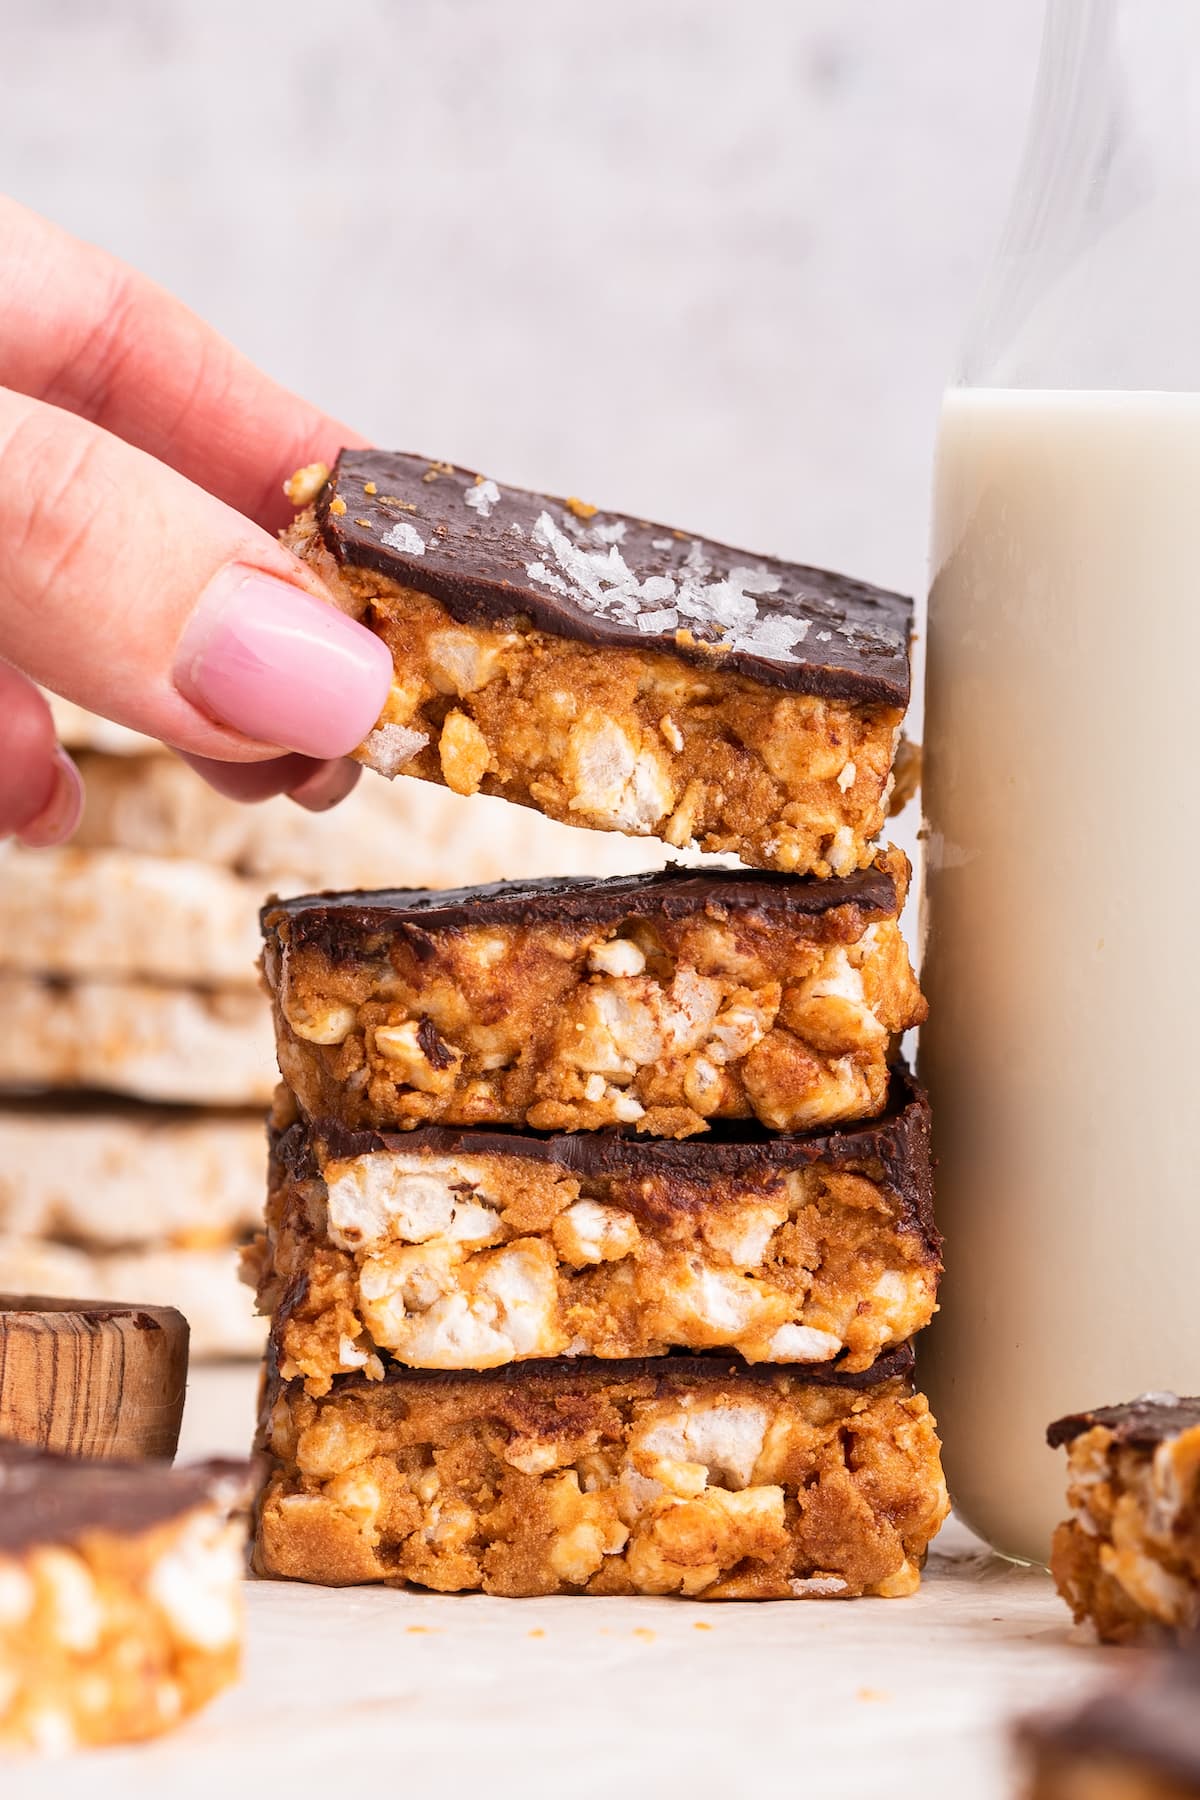 Four no bake peanut butter crunch bars stacked on one another with a woman's hand taking the top one.